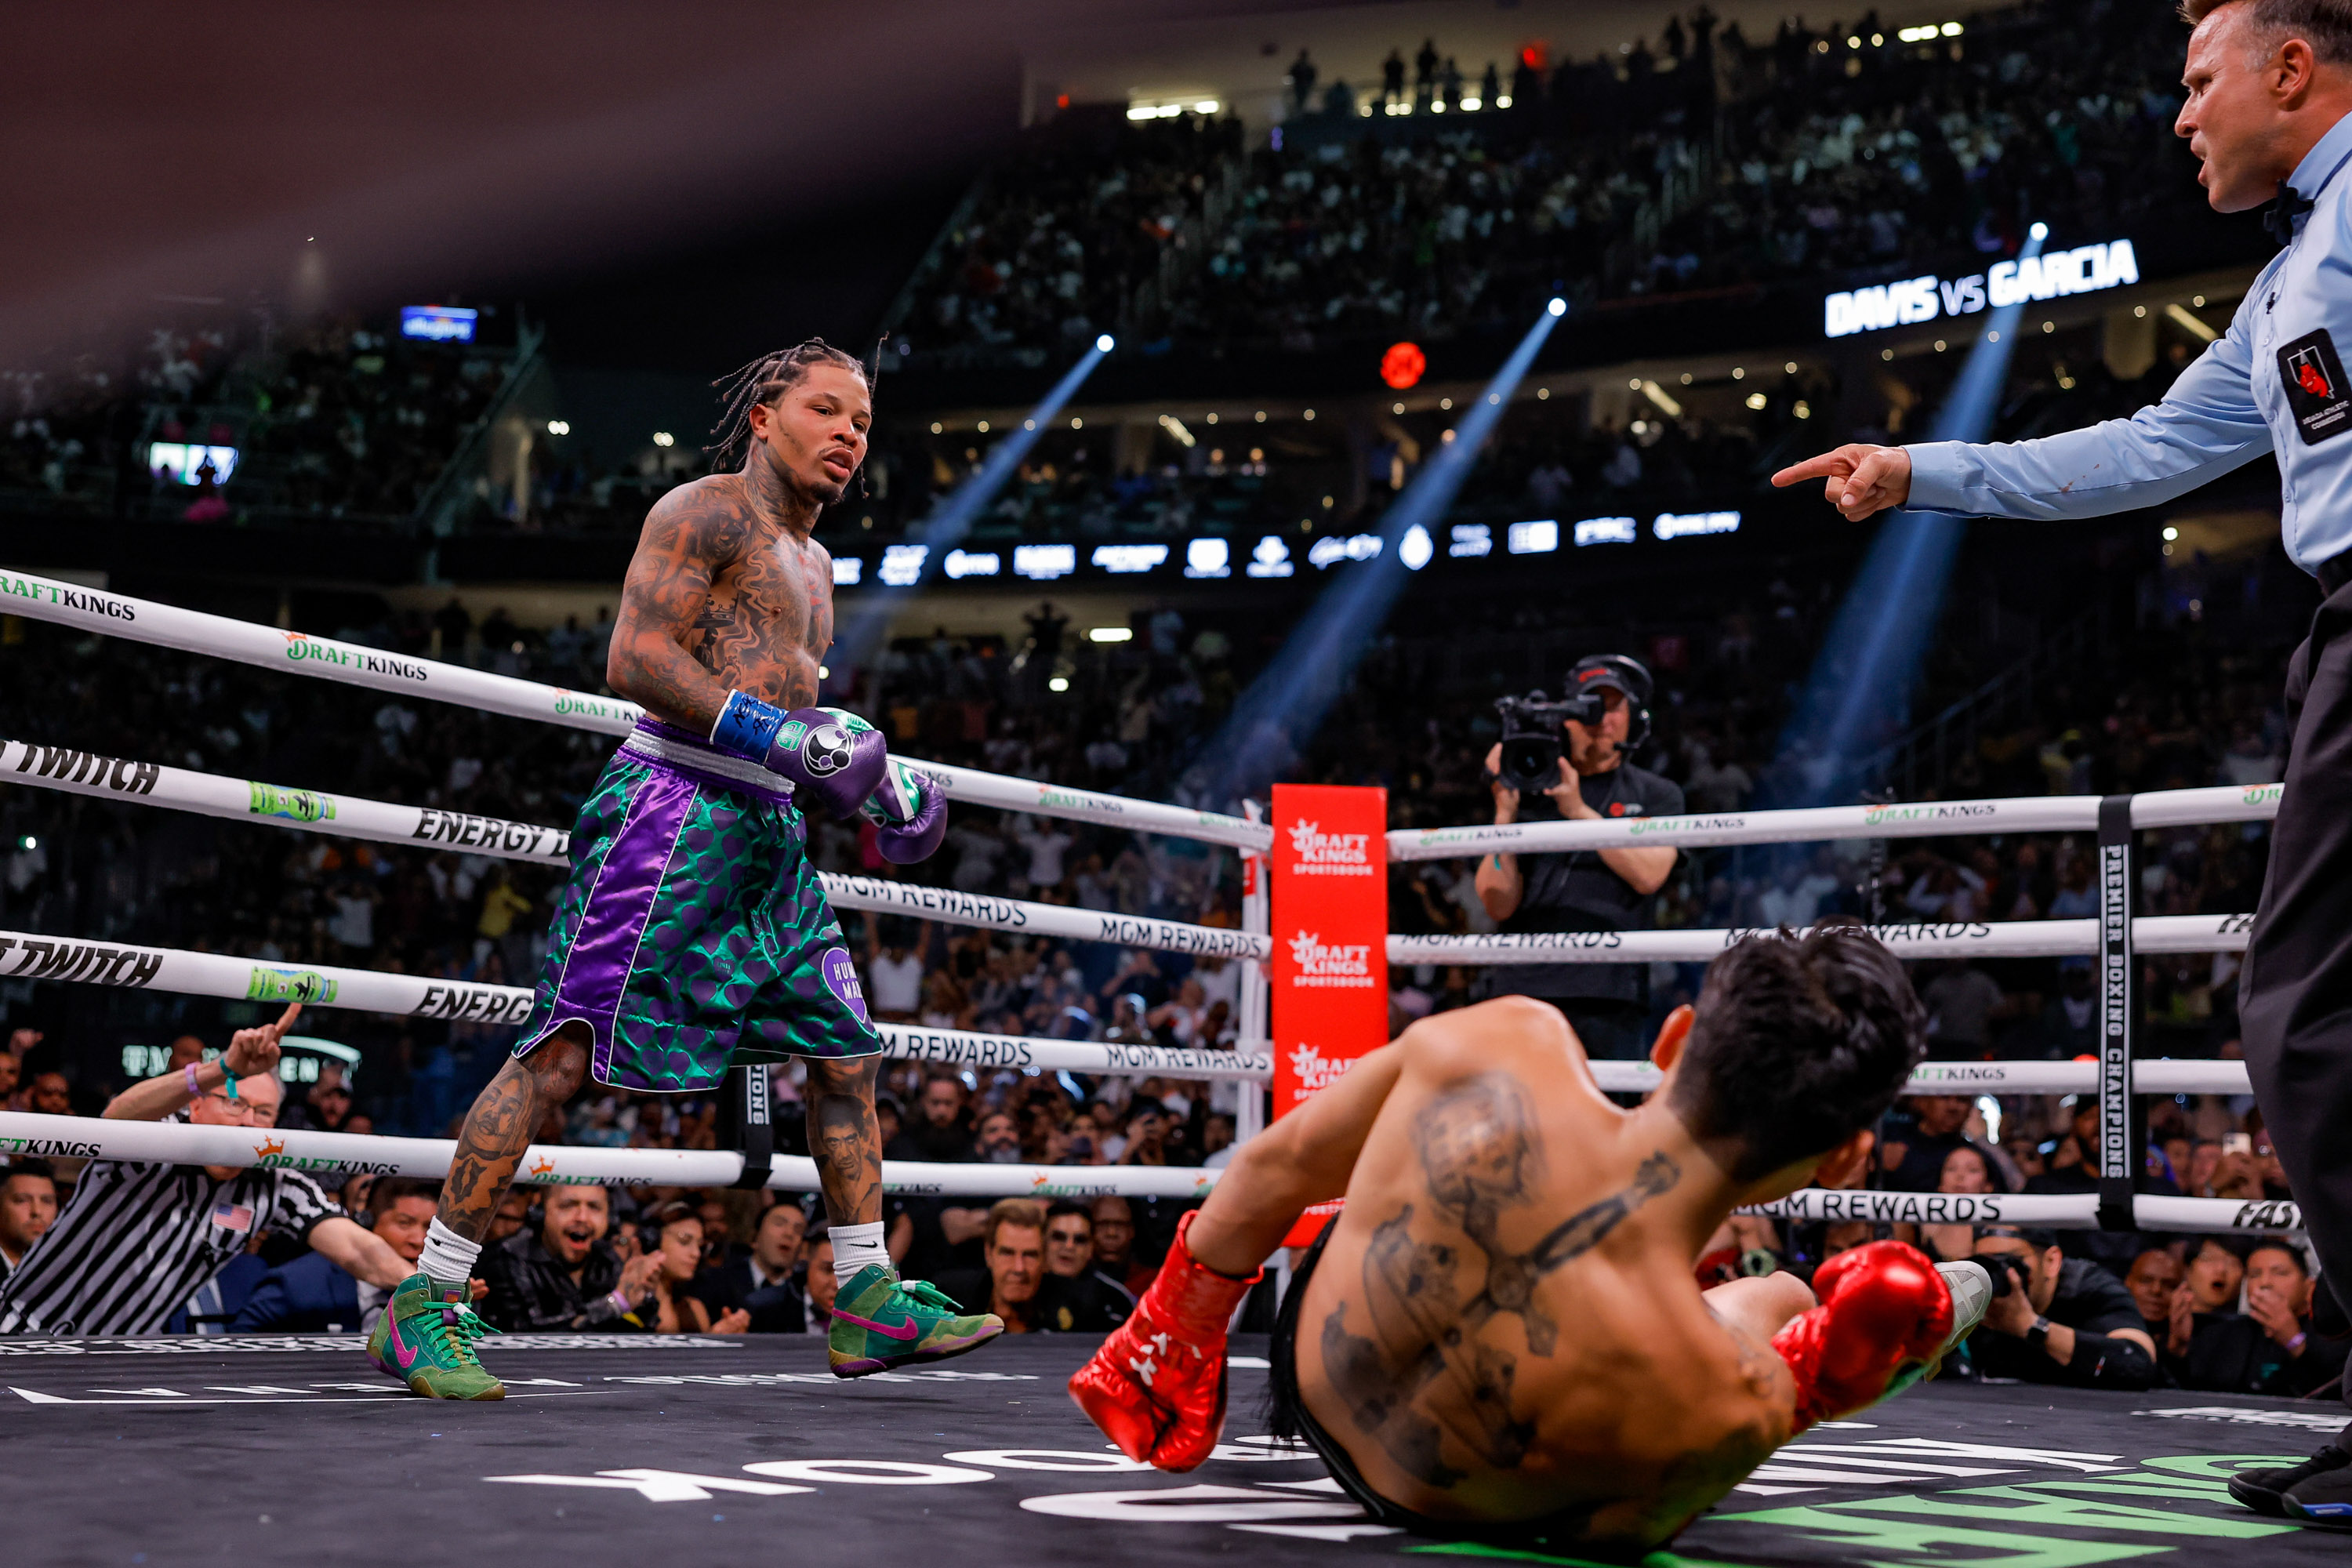 Gervonta Davis wants a stadium fight, according to a source close to the fighter